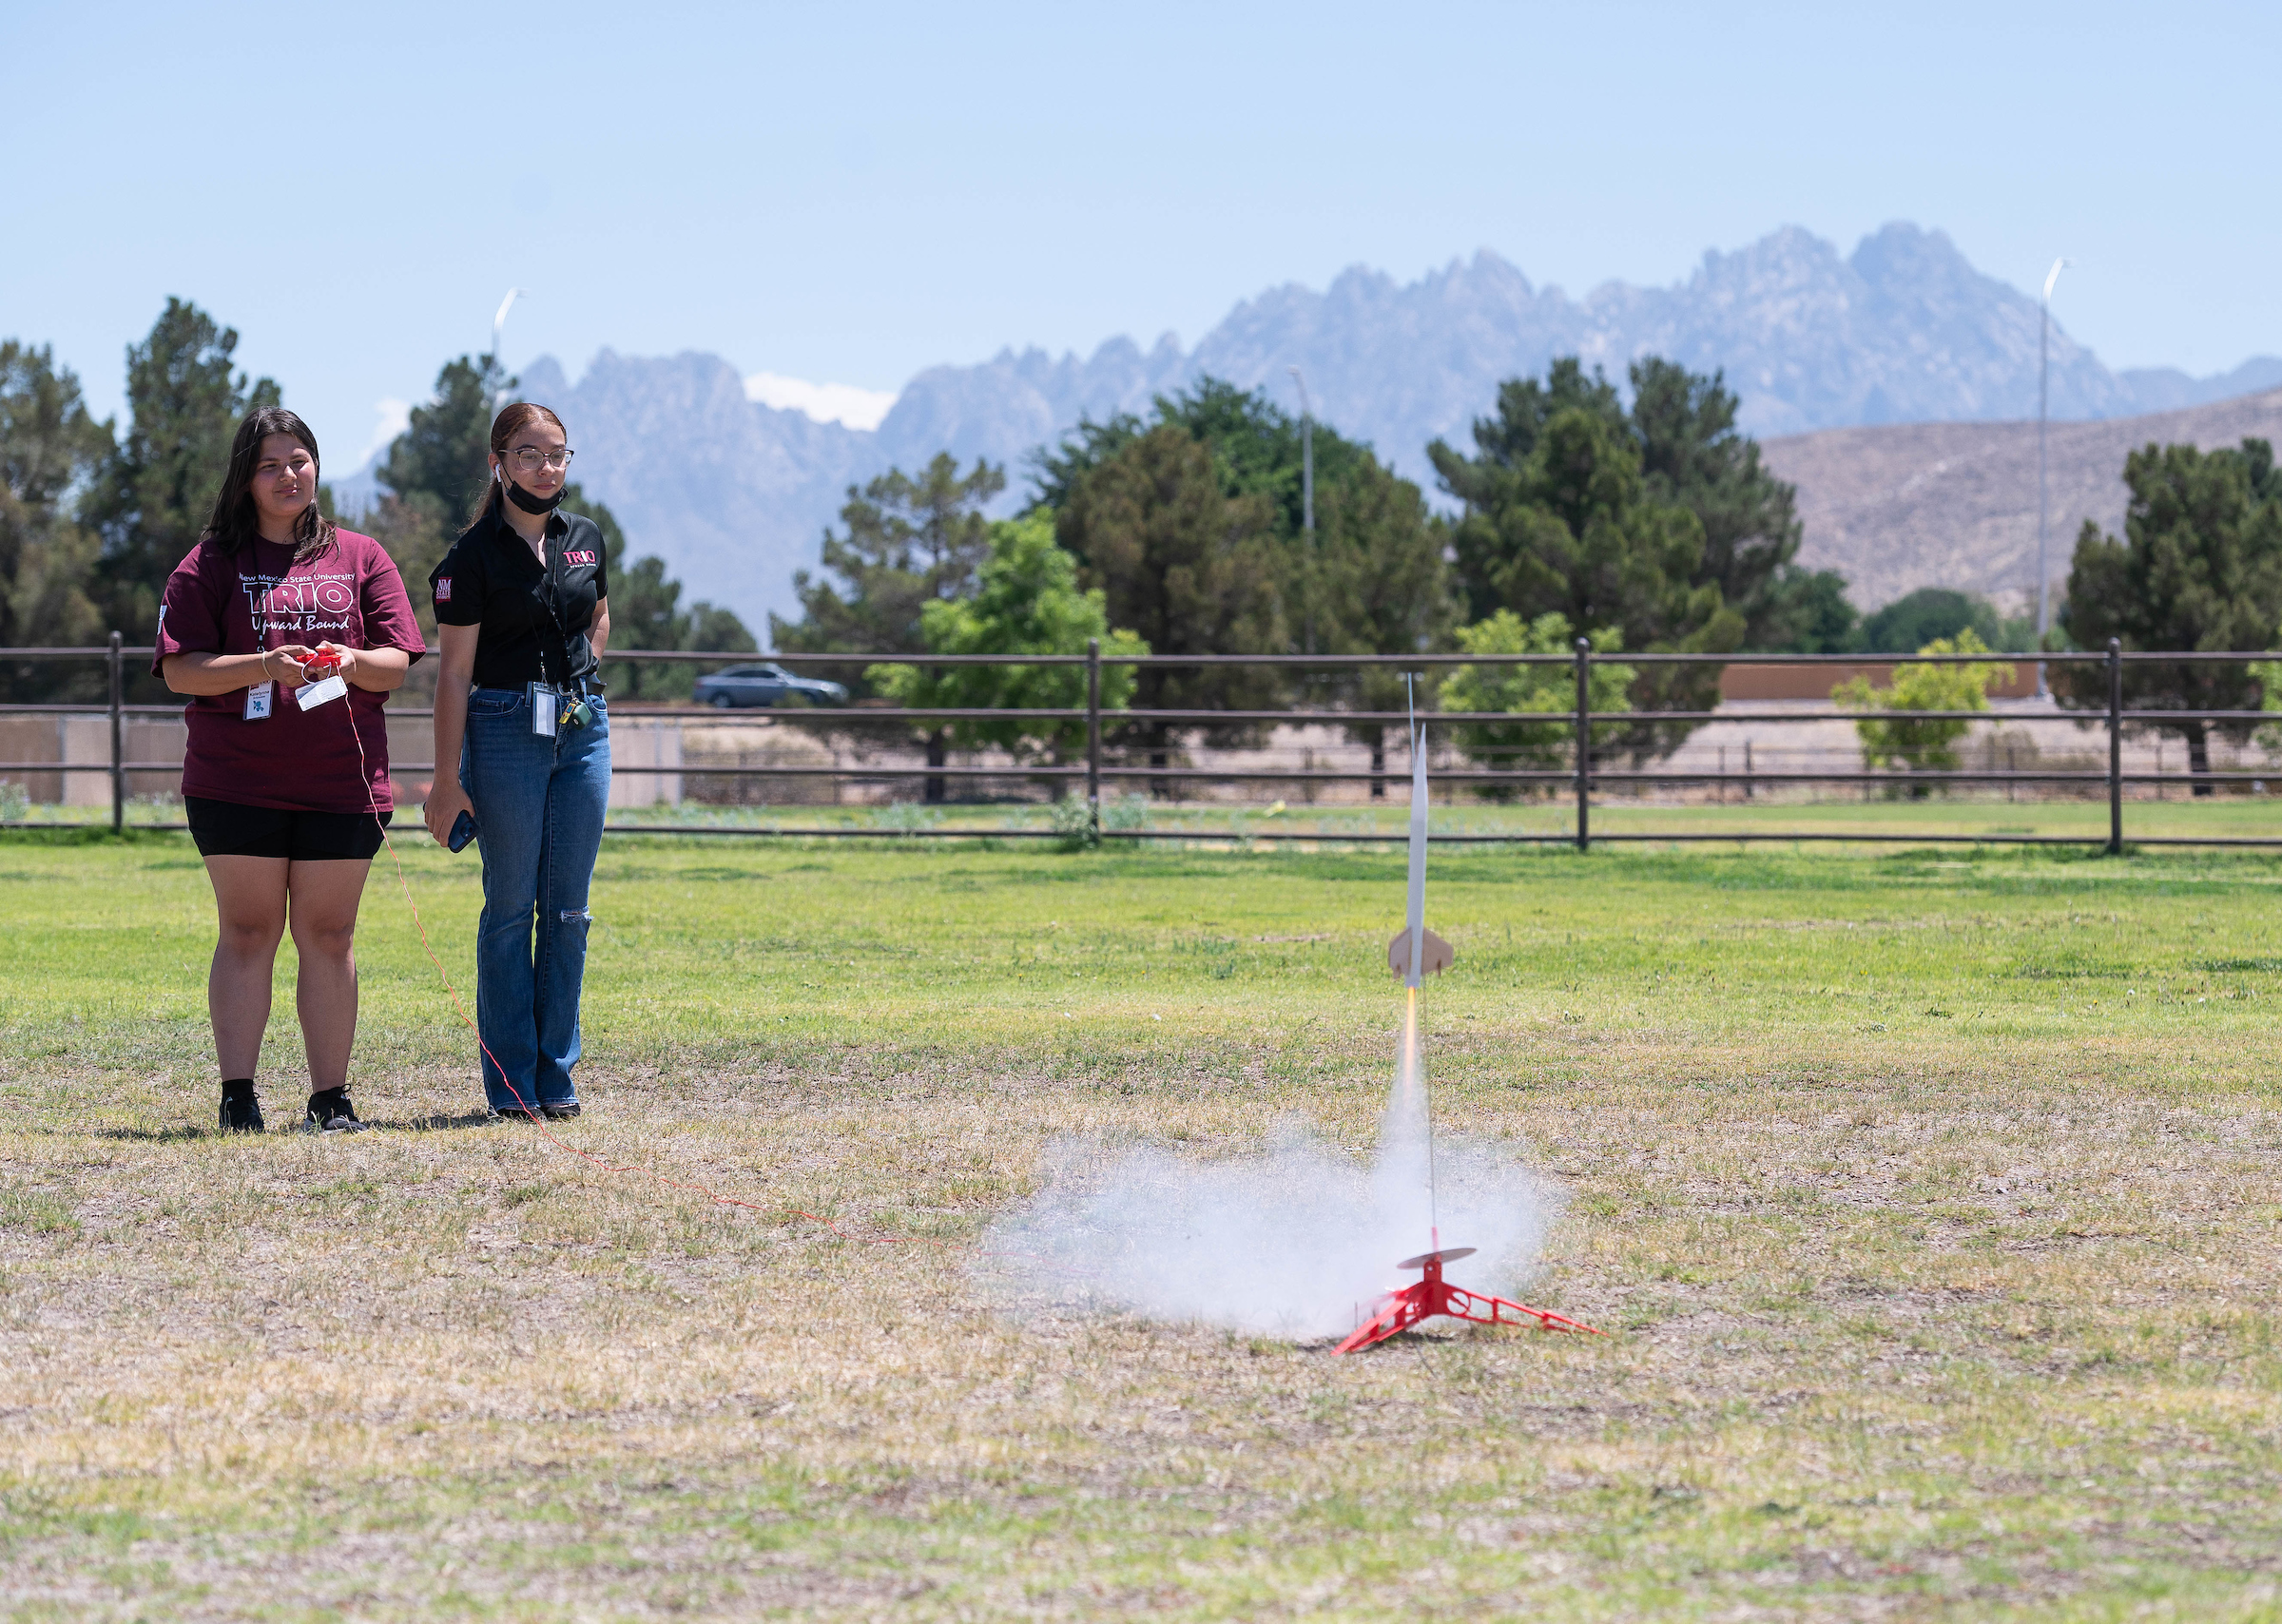 Two young women stand in a field and launch a rocket. 